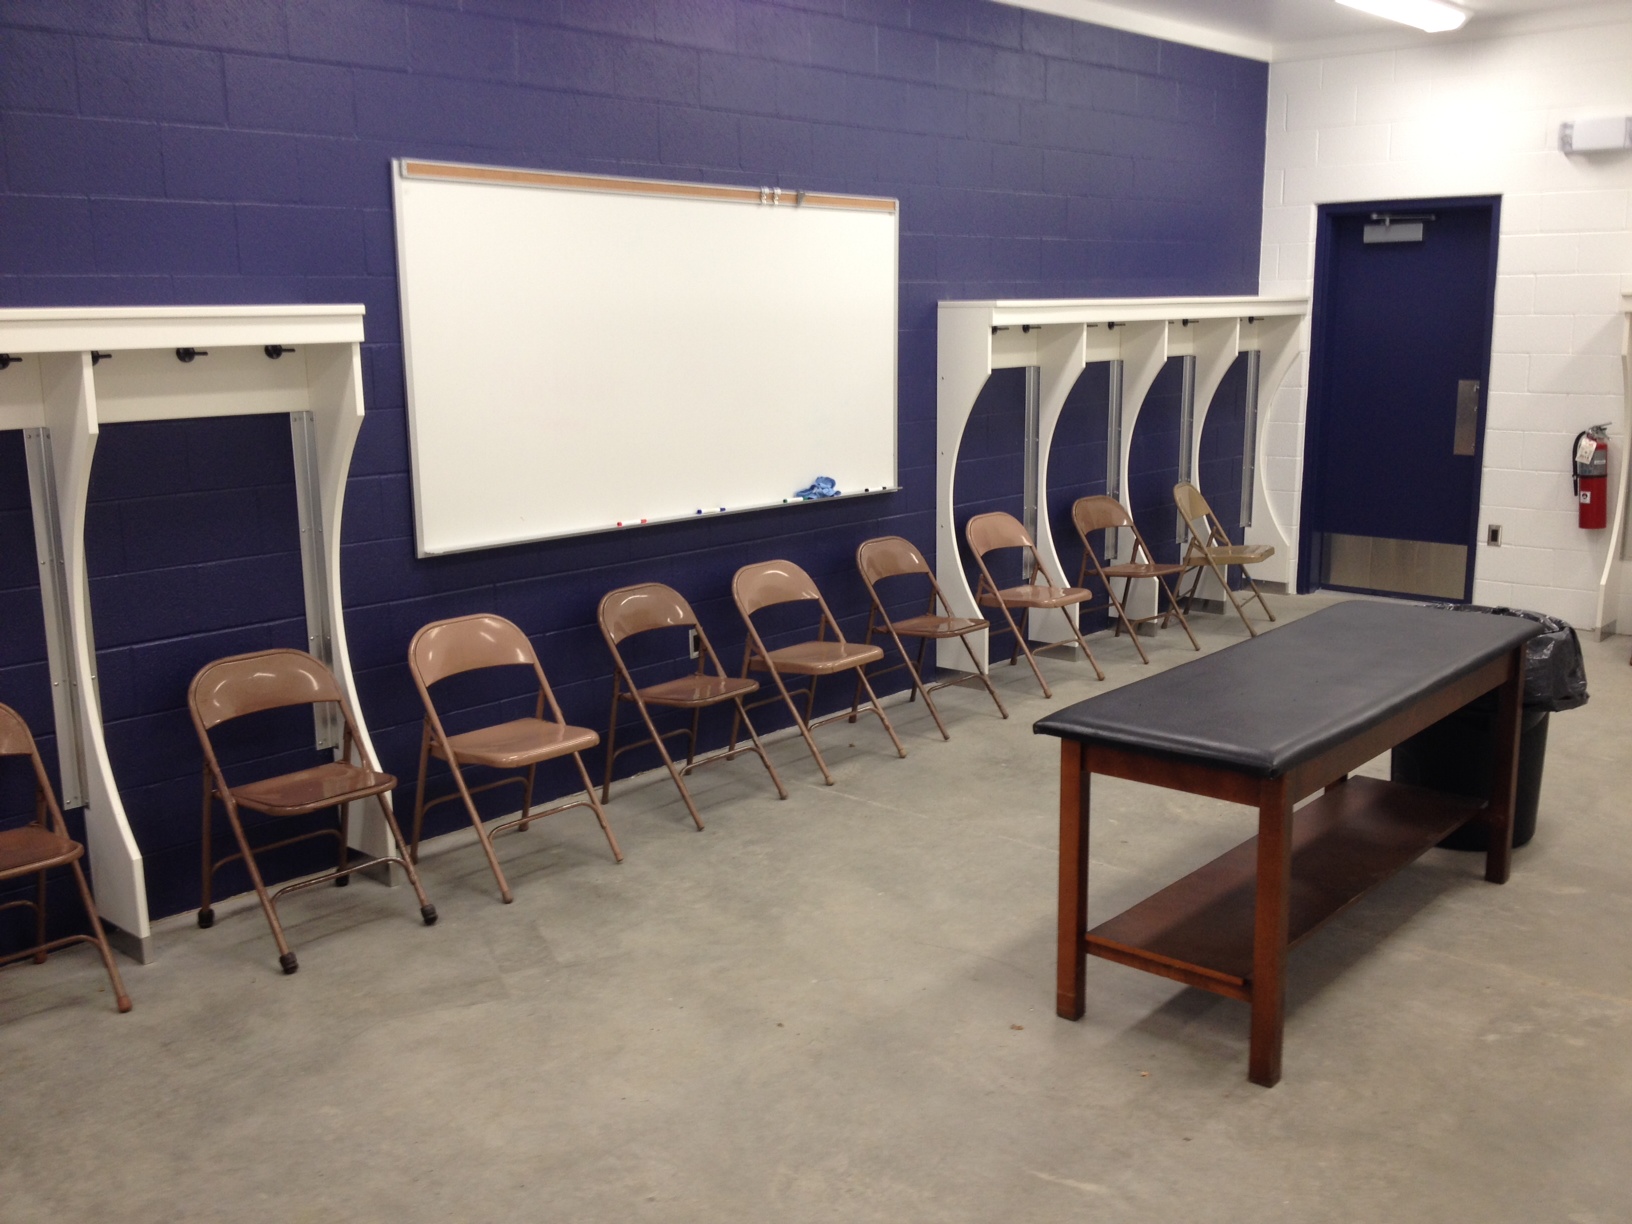 Siebert Park's stadium now has an enhanced meeting room with more storage space.